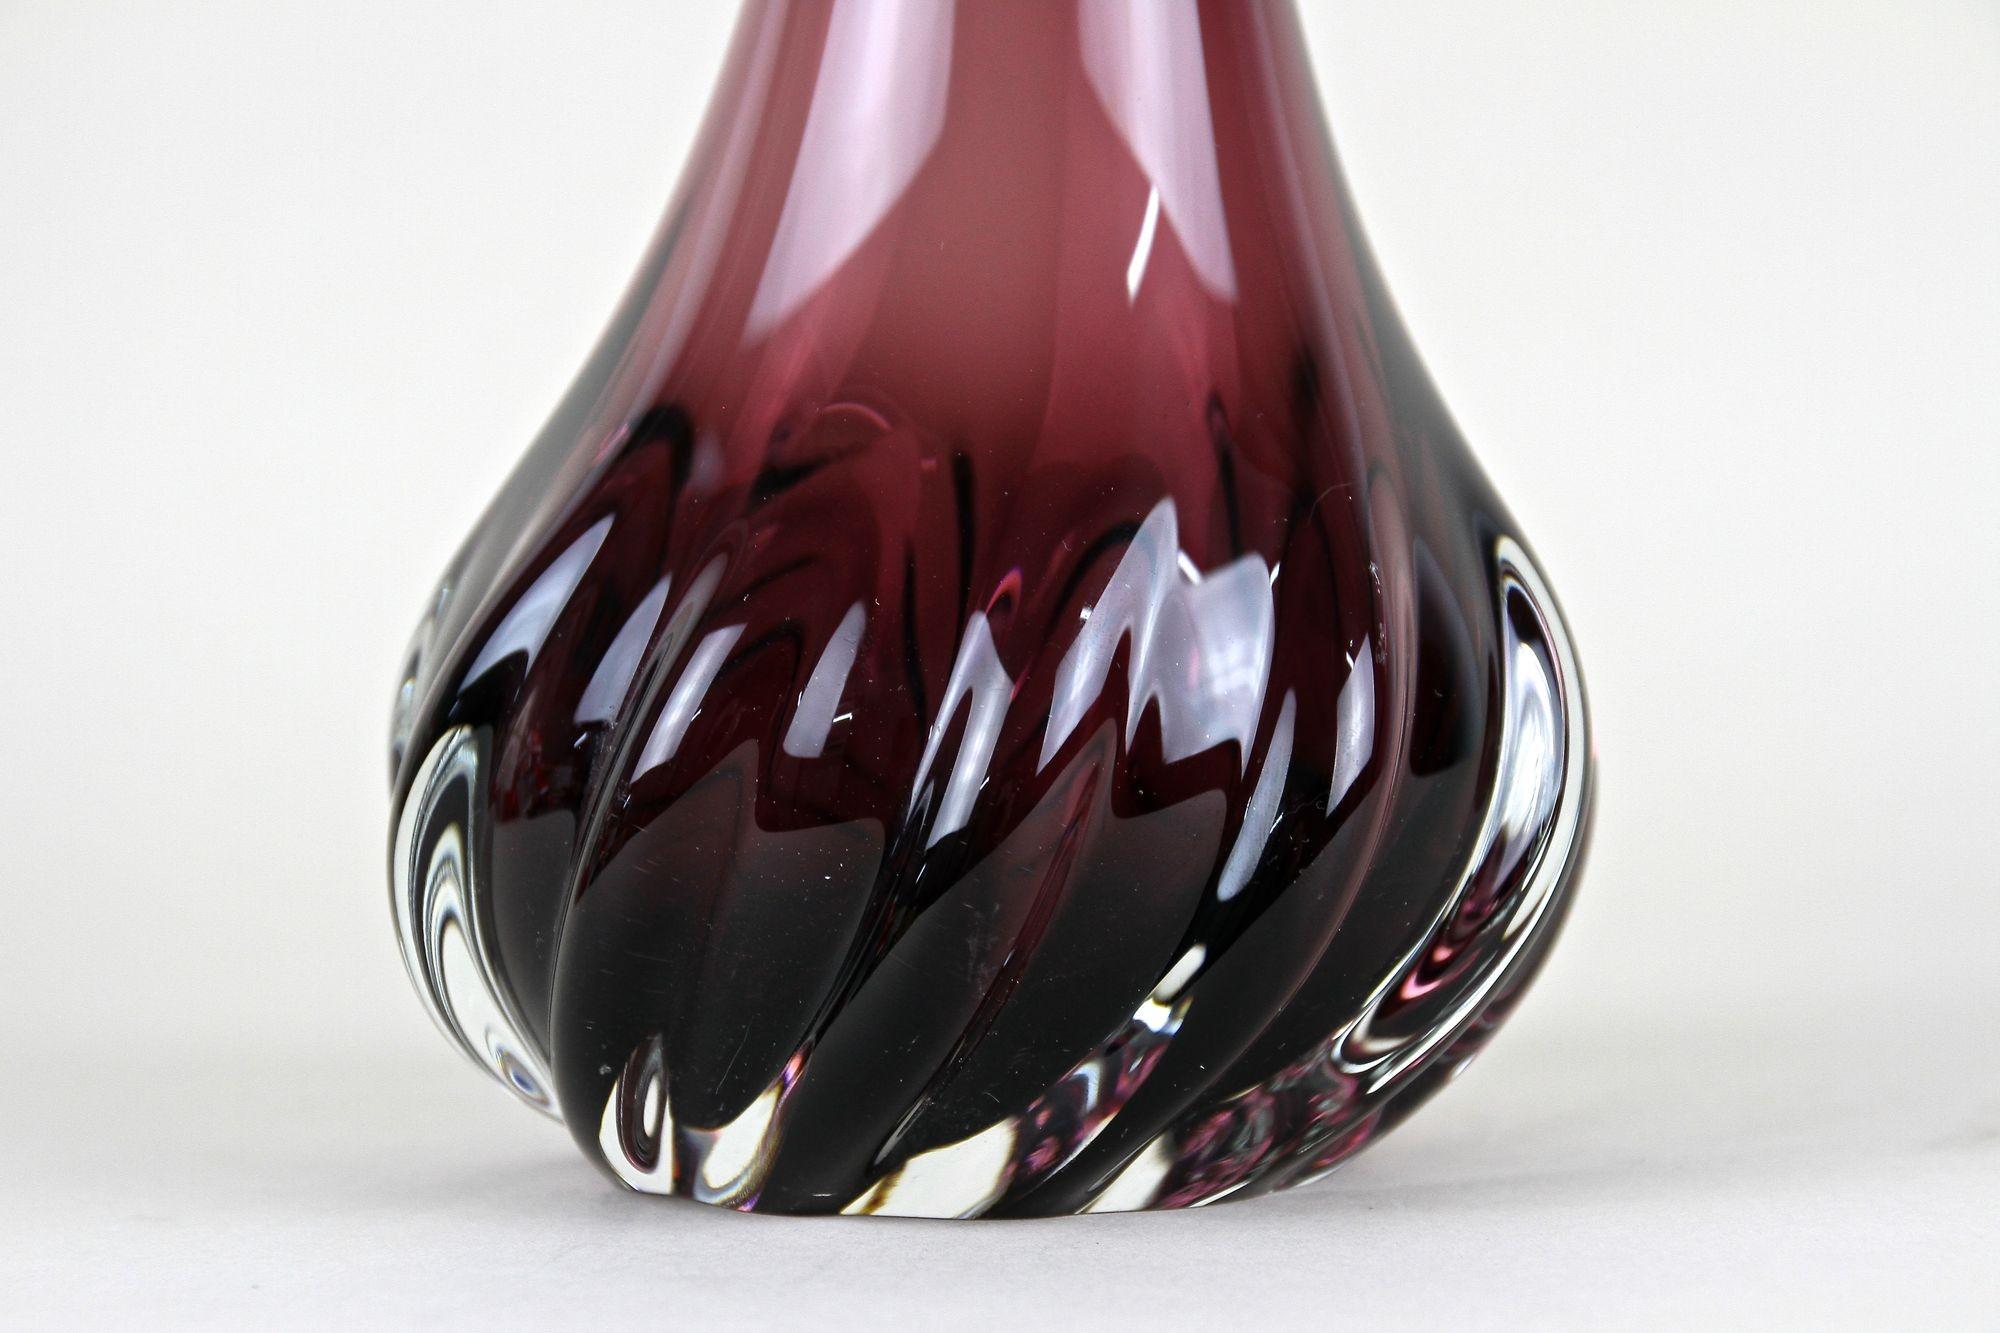 Bordeaux Red Murano Glass Long Neck Vase, 20th Century, Italy circa 1970 For Sale 5